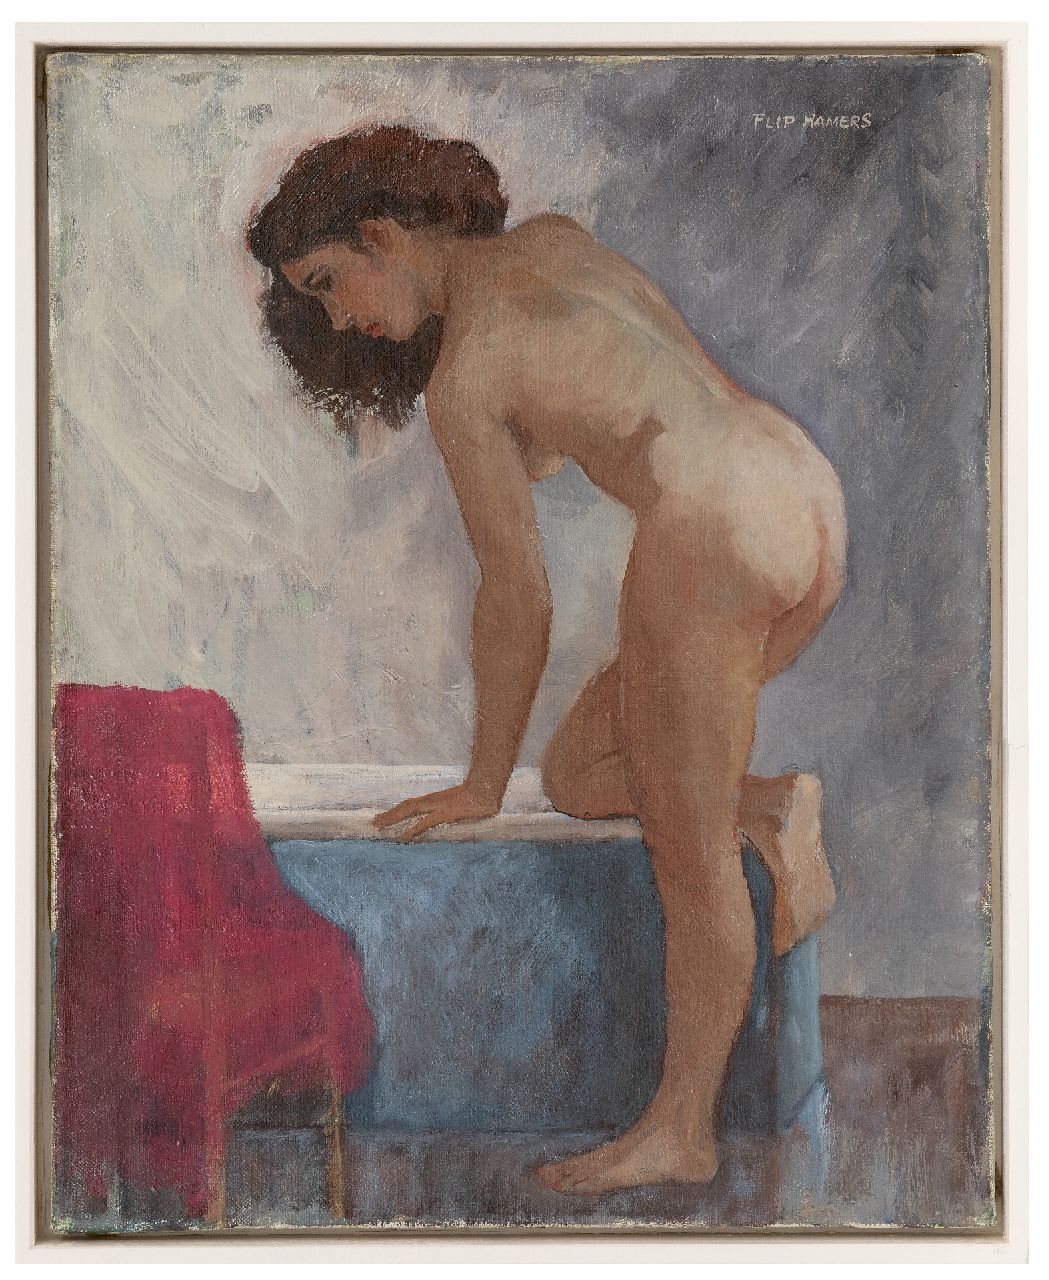 Hamers P.J.  | Philippus Jacob 'Flip' Hamers, Standing nude, oil on canvas 50.2 x 40.2 cm, signed u.r. and on the stretcher